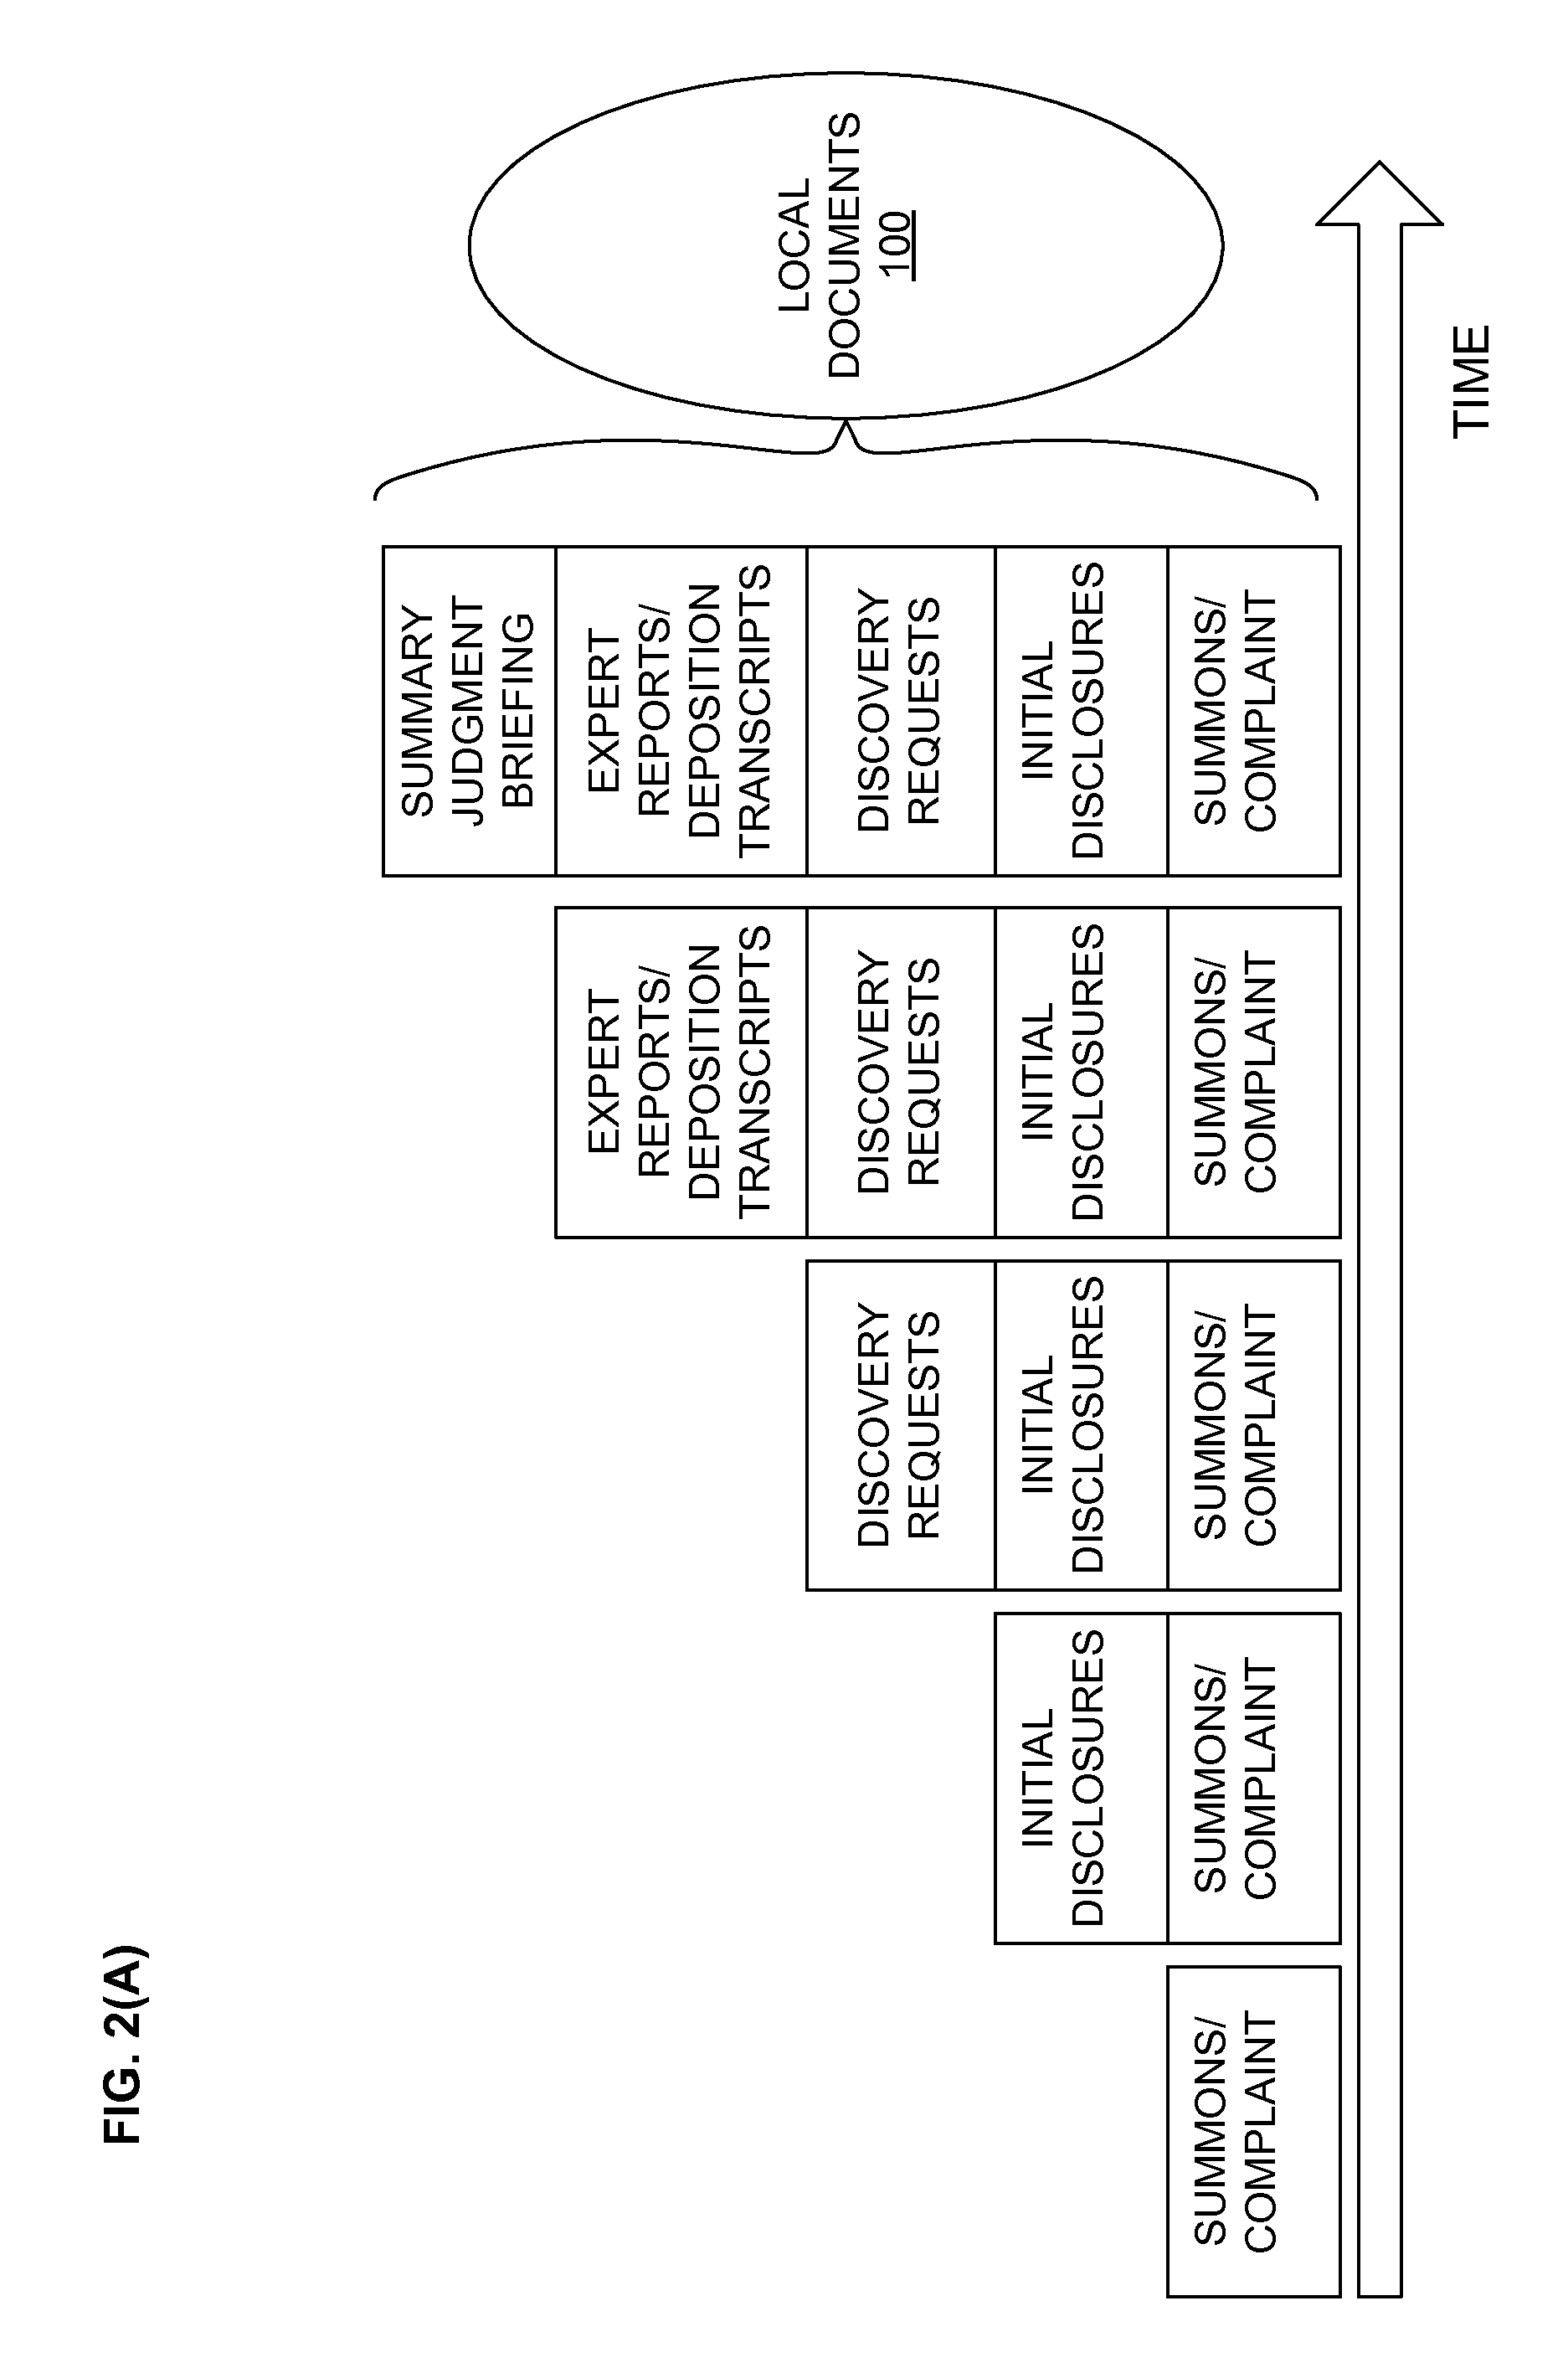 Intuitive, contextual information search and presentation systems and methods